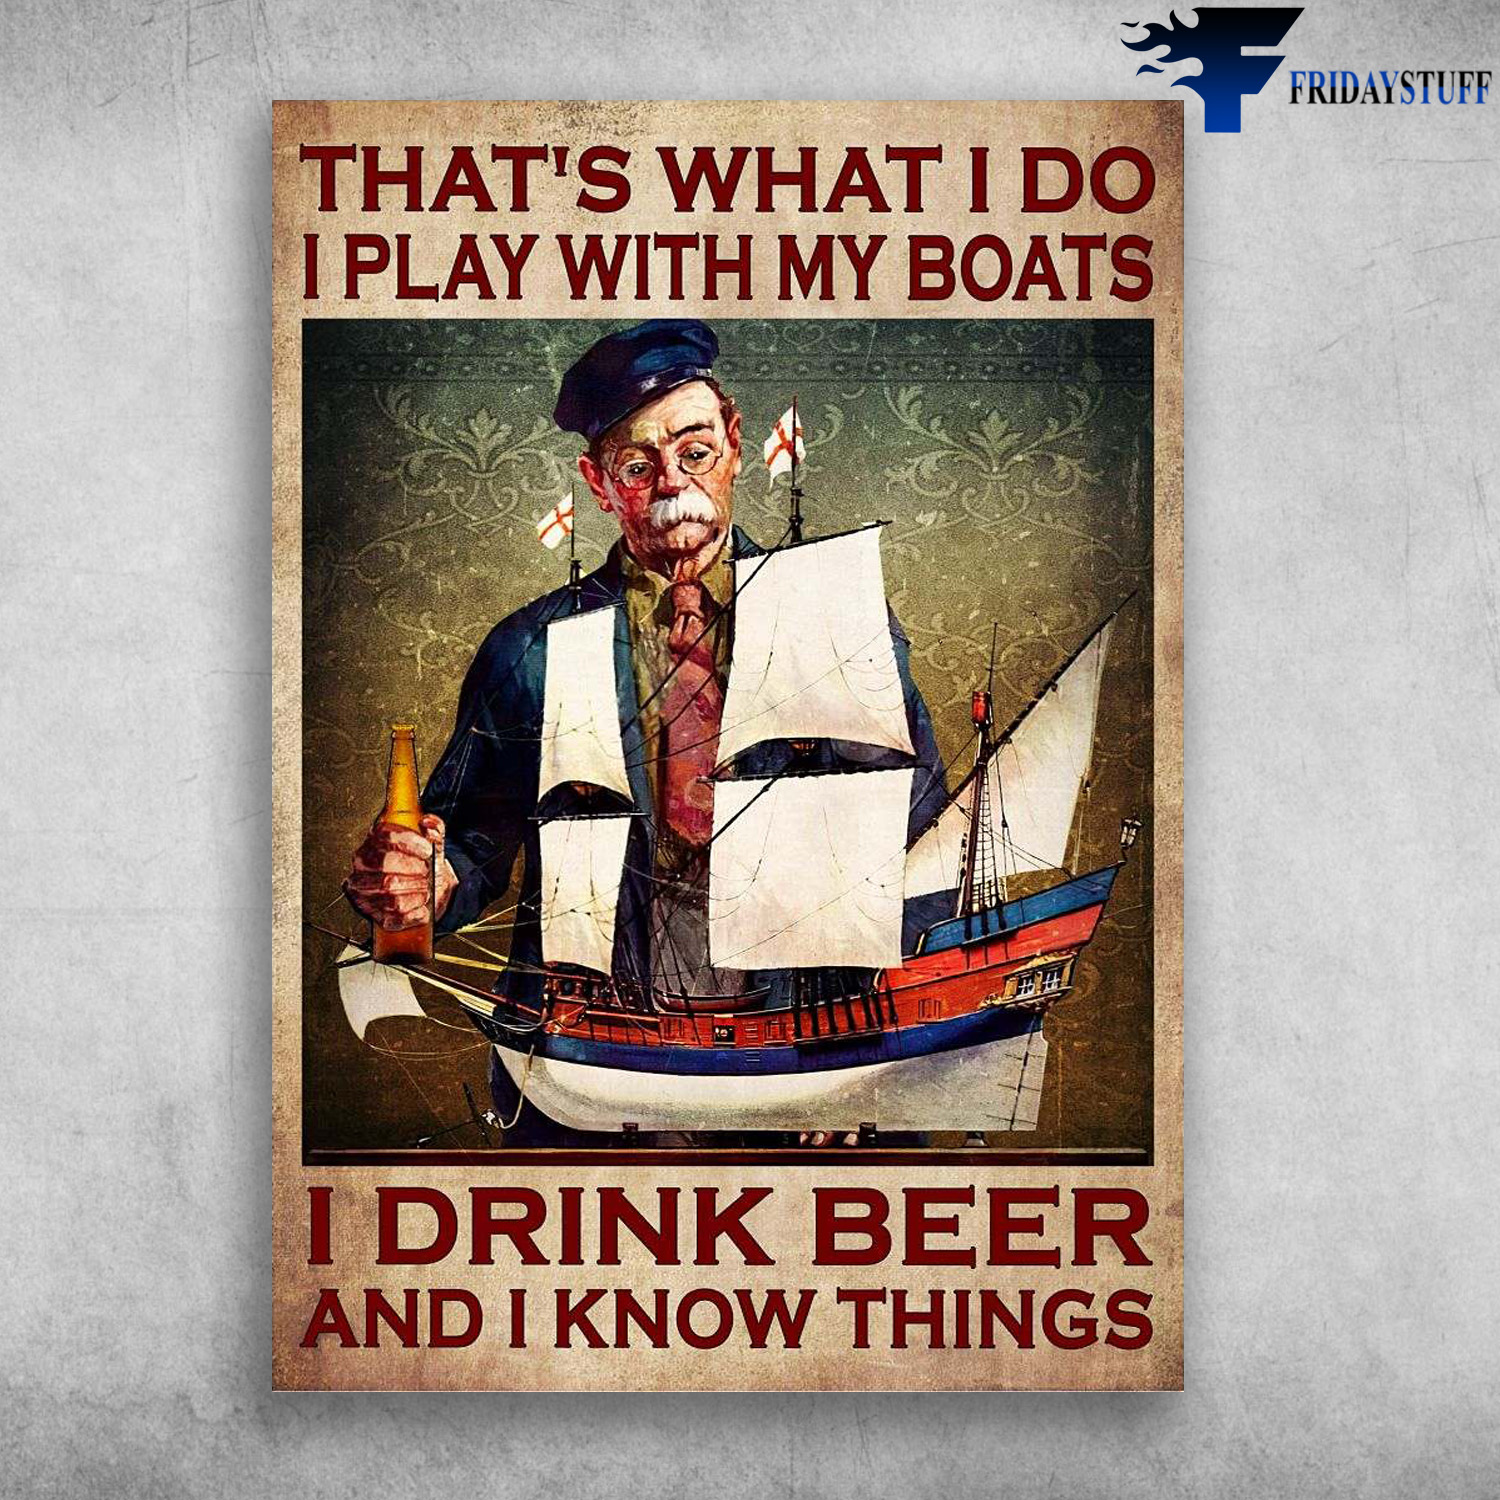 Old Man Boats, Drink Beer - That's What I Do, I Play With My Boats, I Drink Beer, And I Know Things